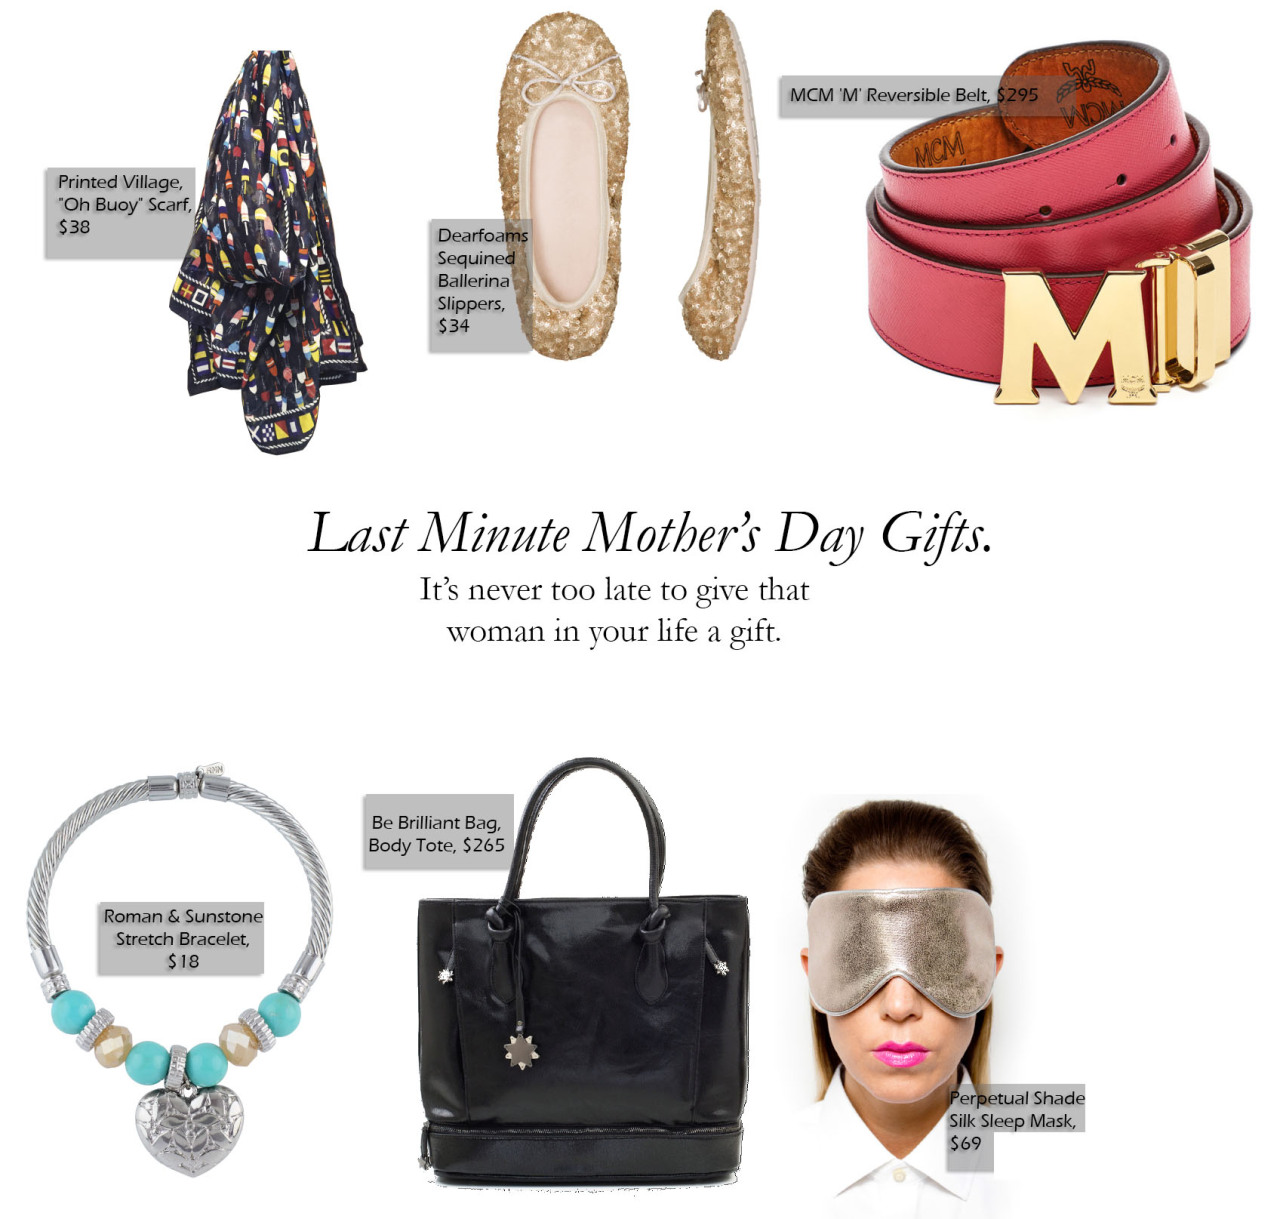 Last Minute Mother's Day Gifts.